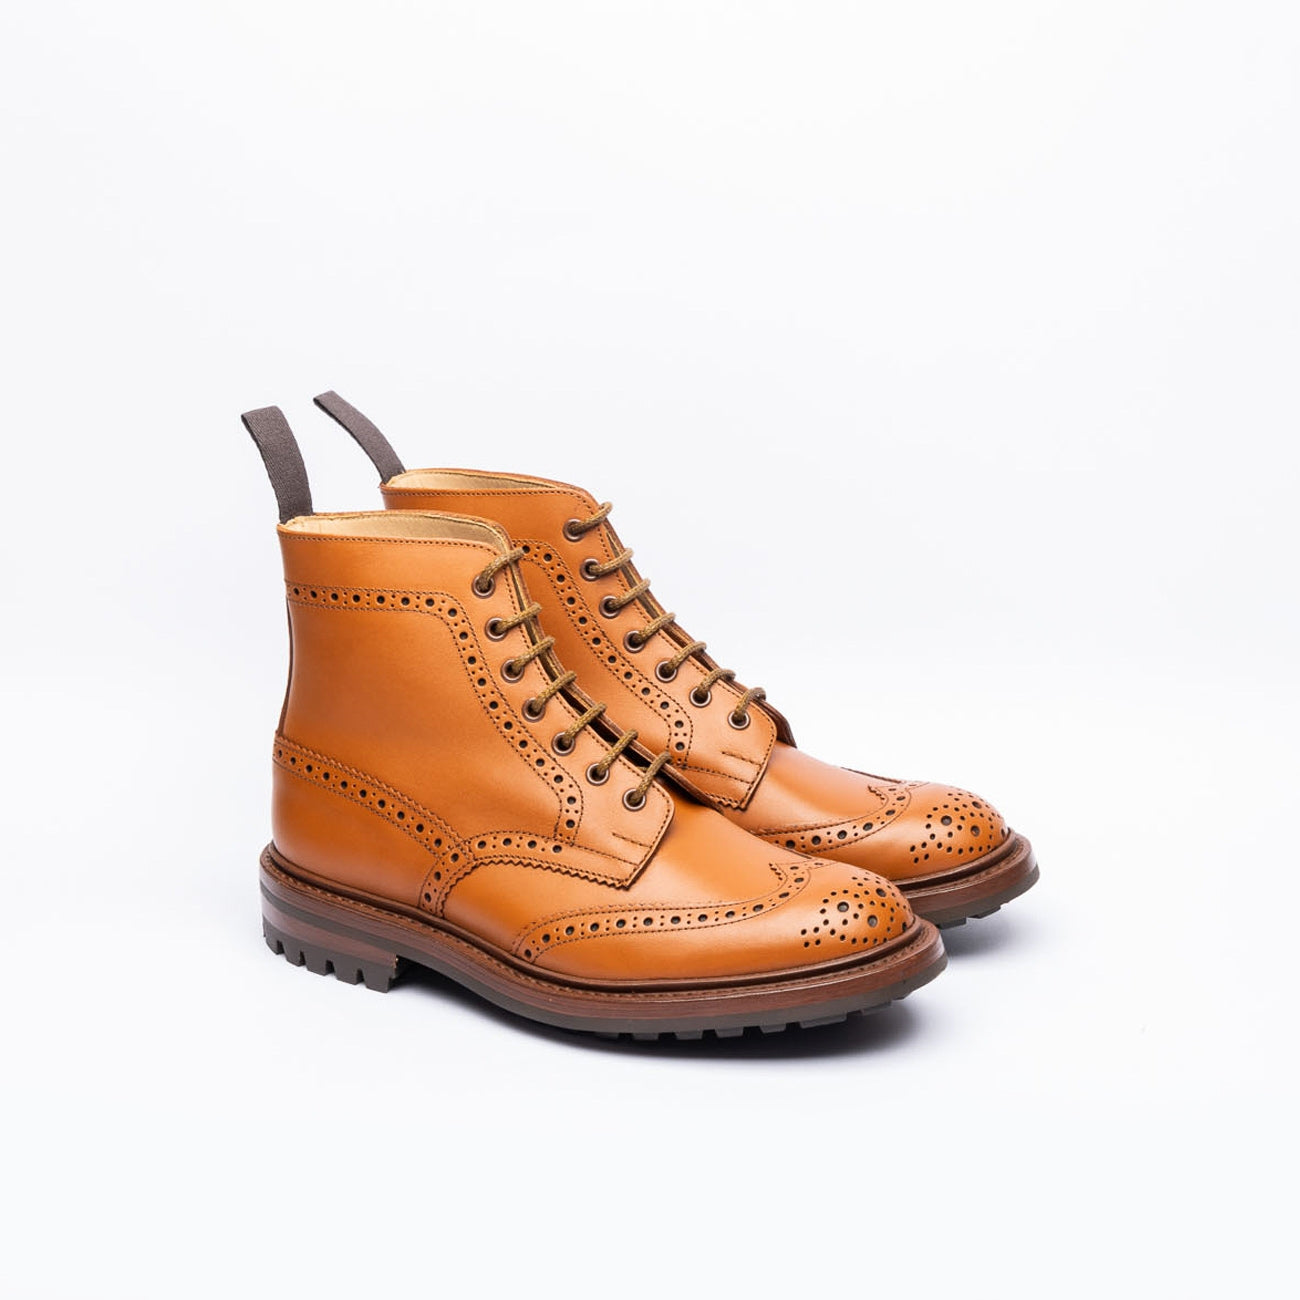 Polacco derby Tricker's Stow in pelle color cuoio